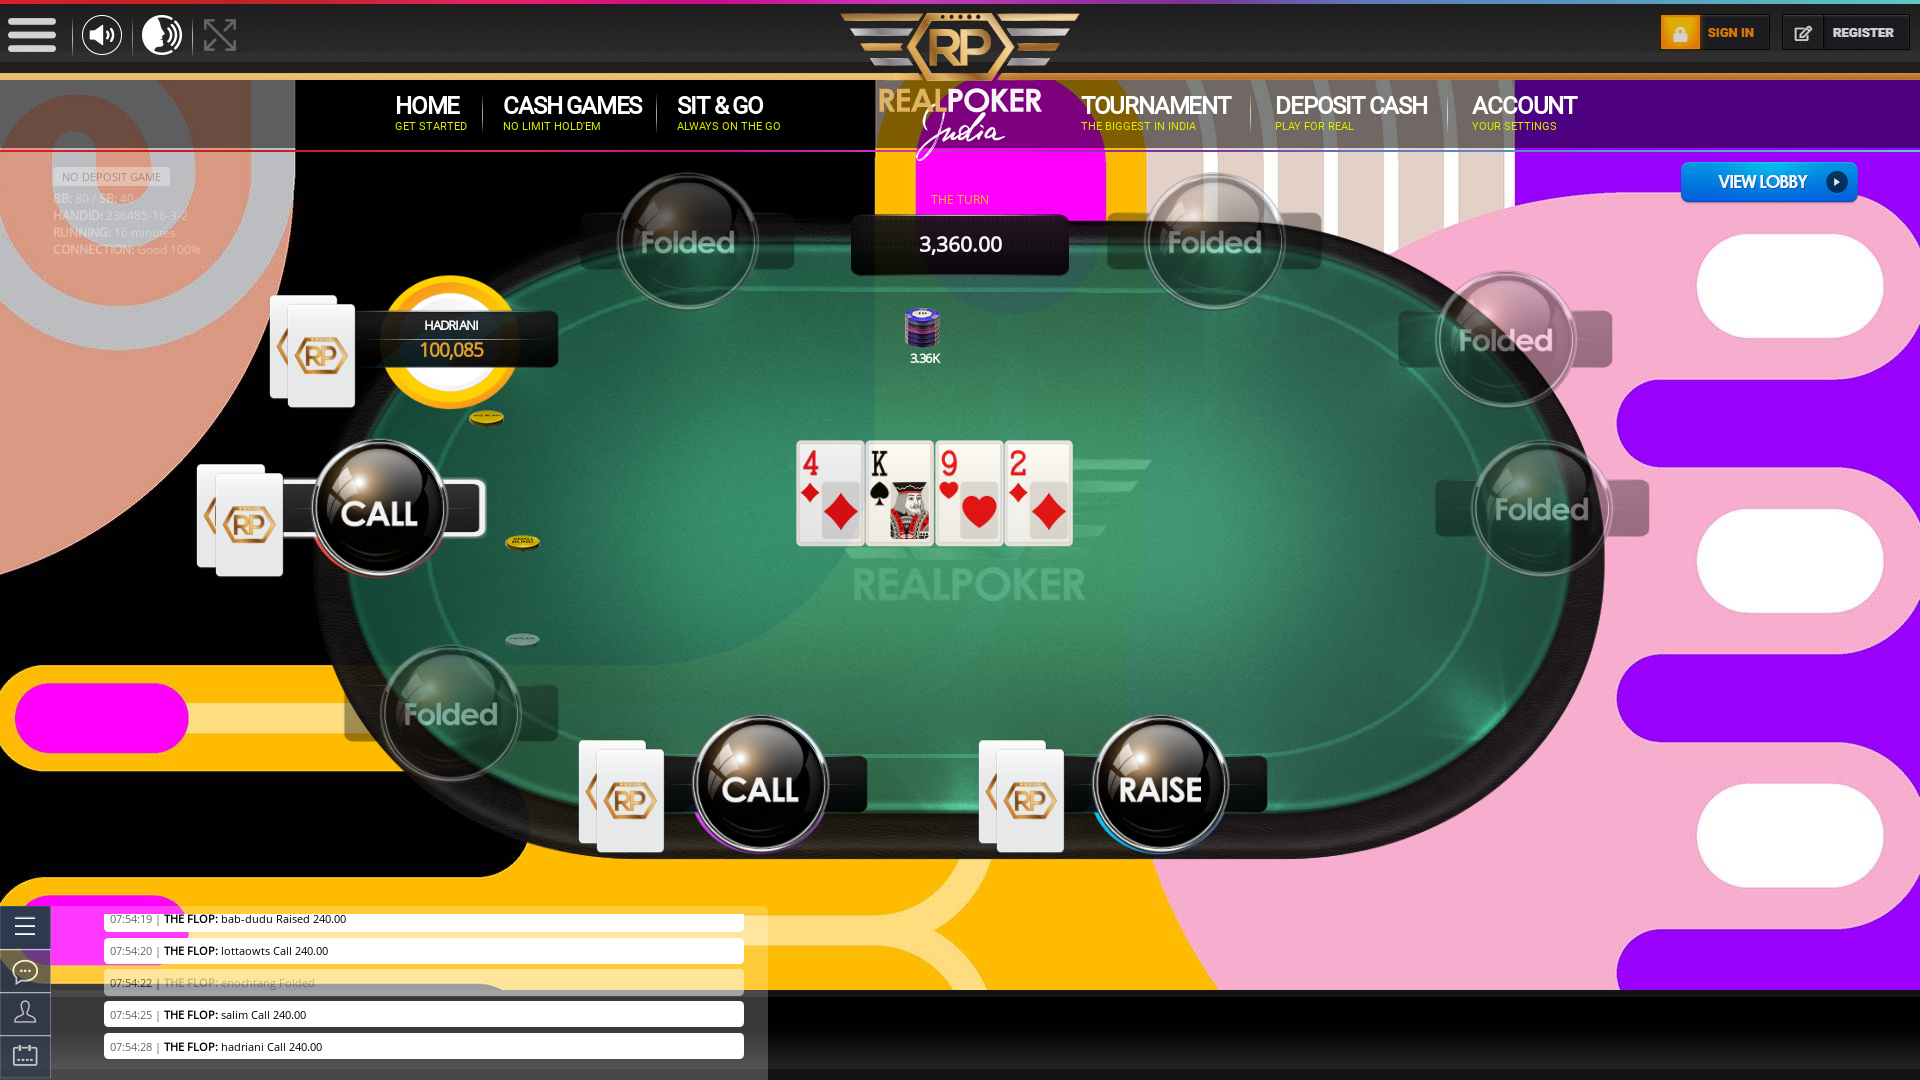 Real poker 10 player table in the 16th minute of the match